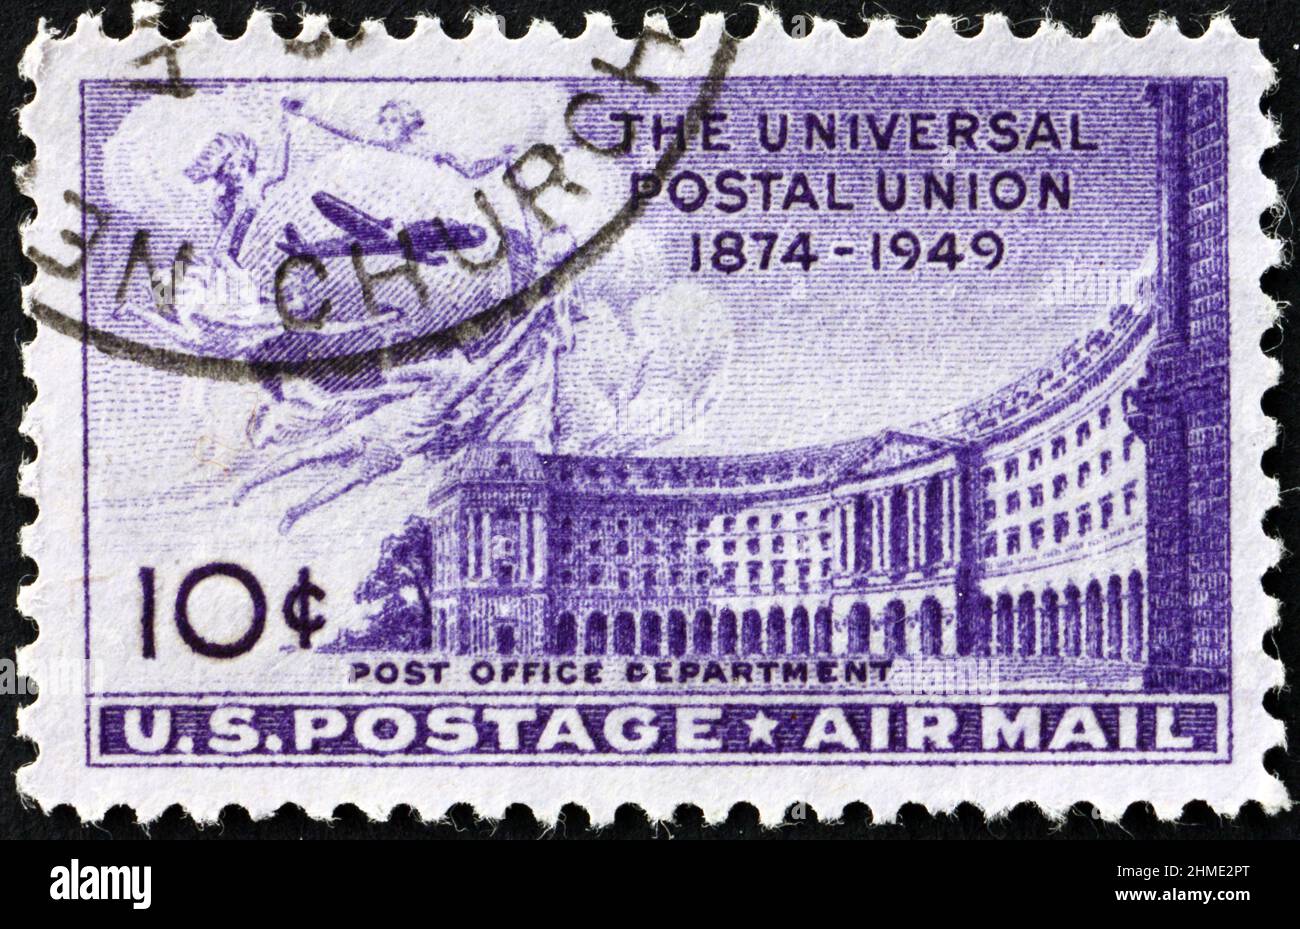 USA - CIRCA 1949: a stamp printed in the USA shows Post Office Department Building, 75th Anniversary of the Universal Postal Union, circa 1949 Stock Photo